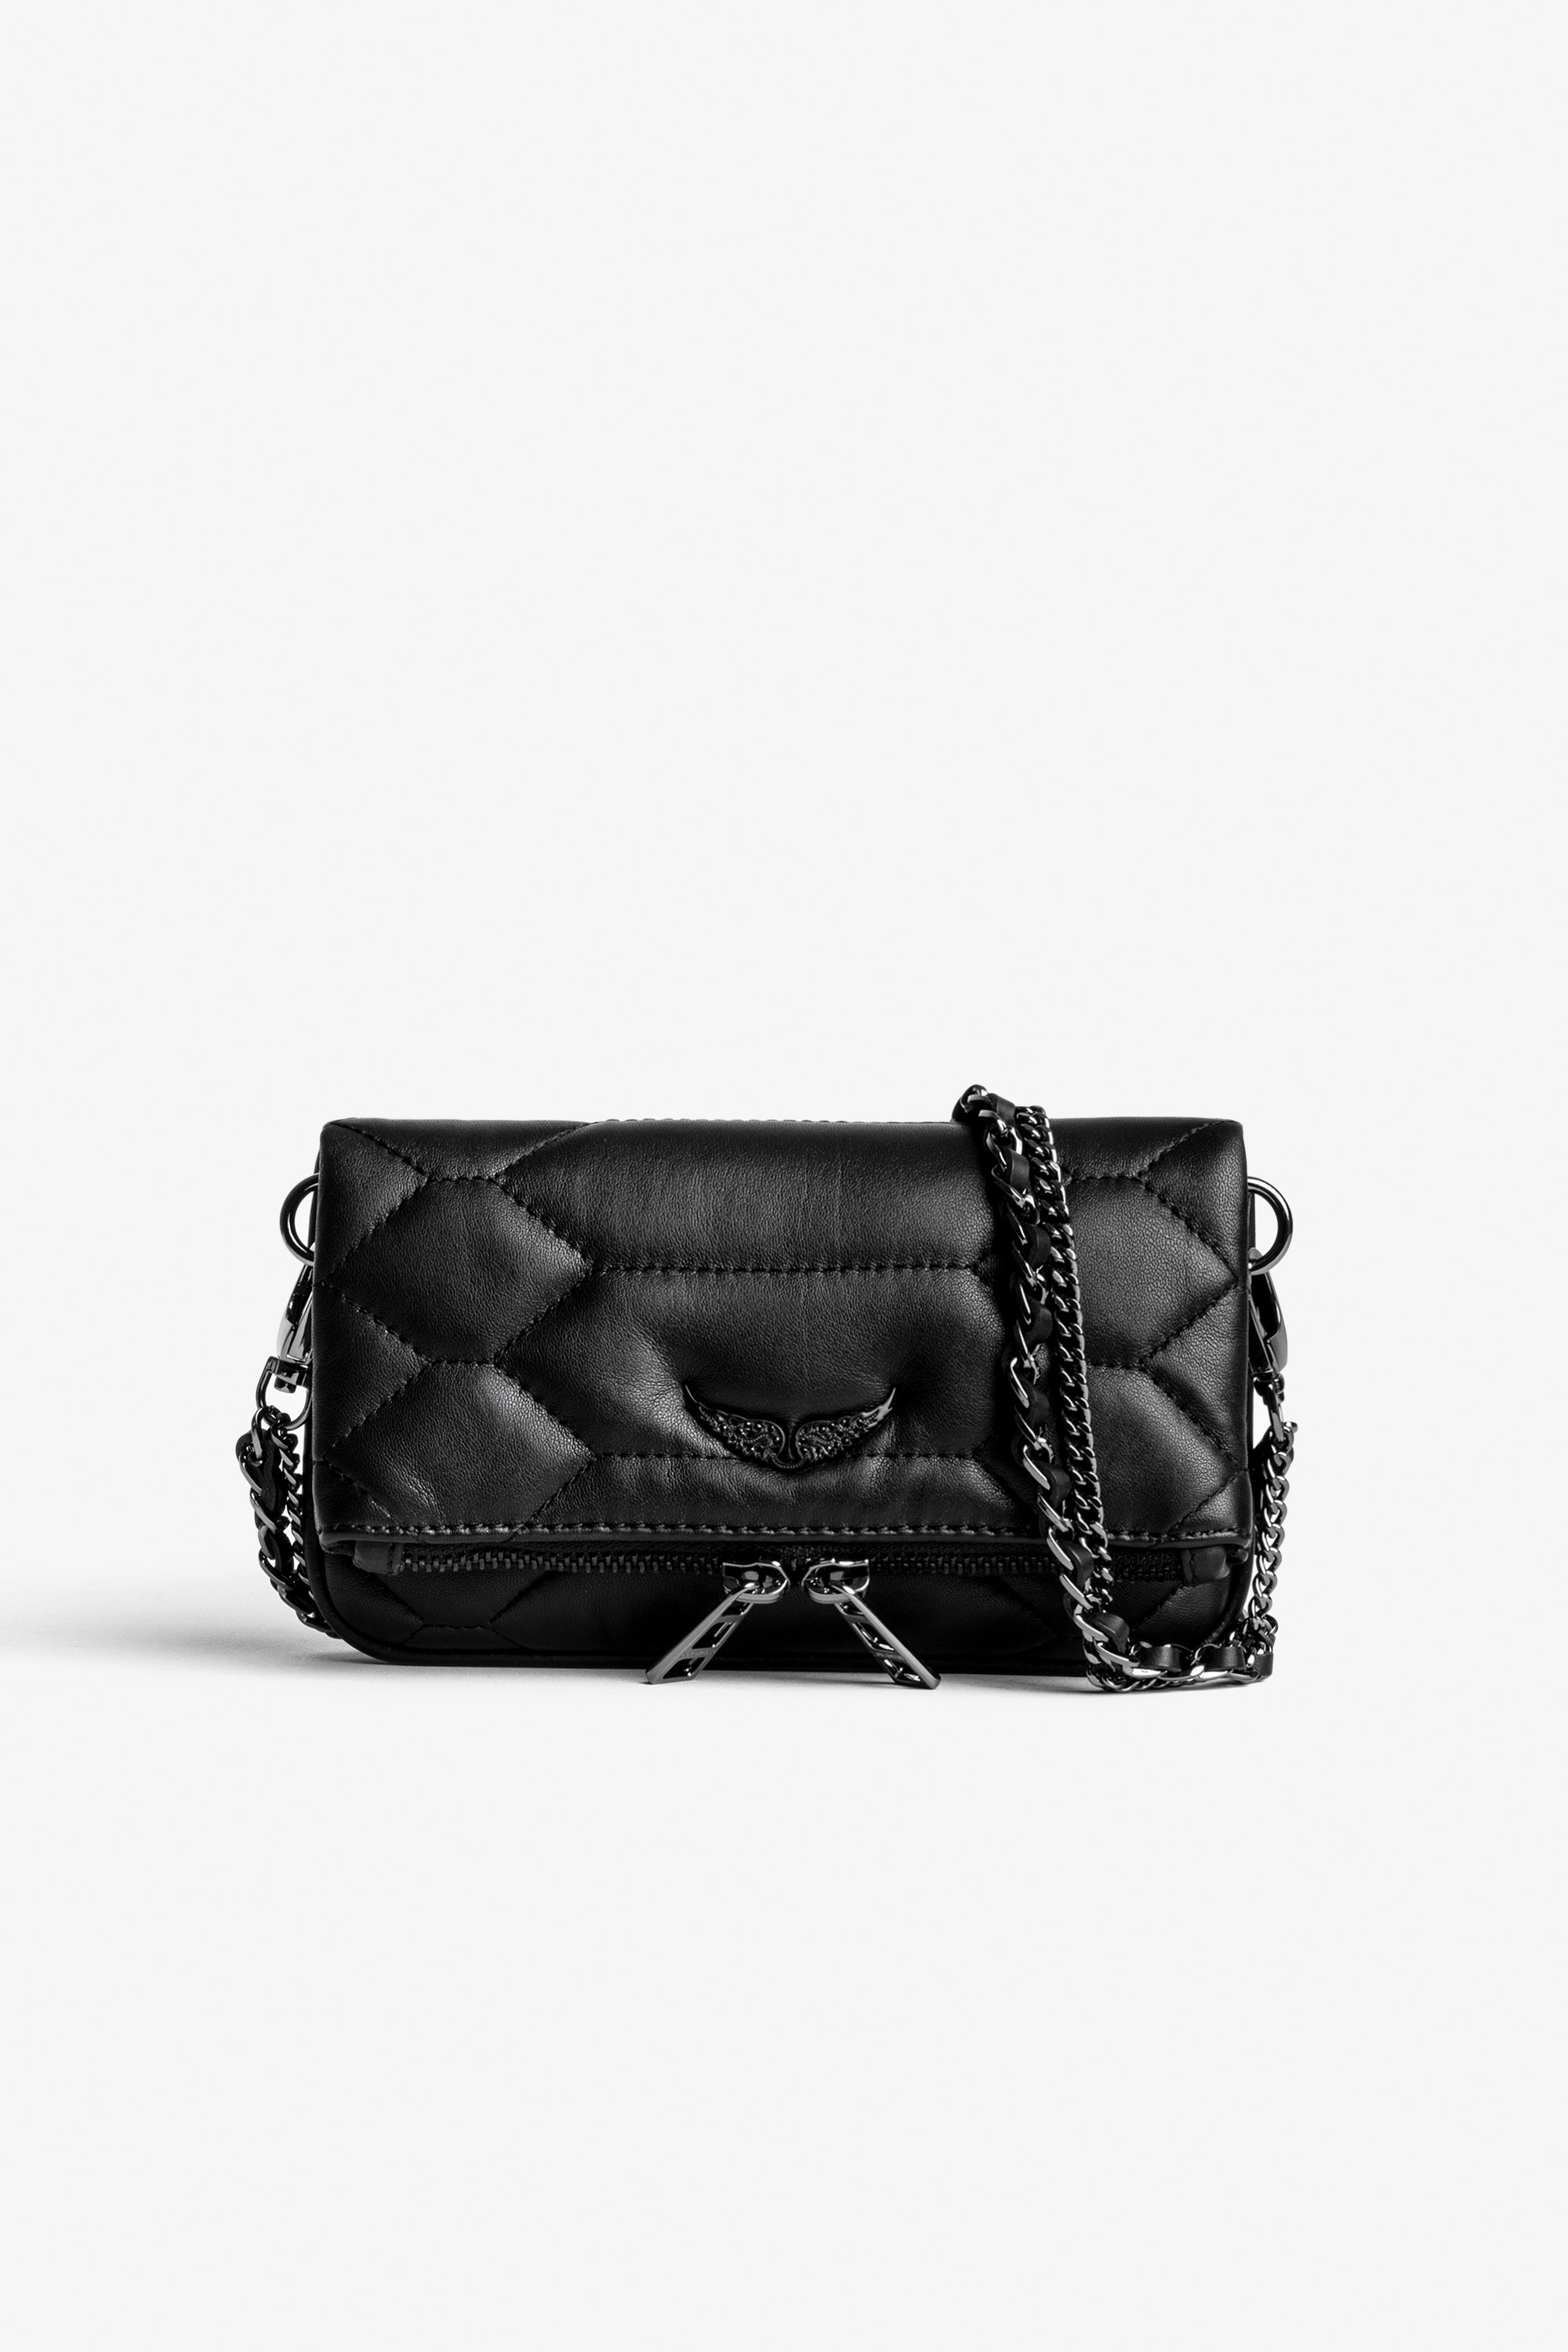 Rock Nano Quilted Leather Clutch - Rock Nano Black Quilted Leather Clutch